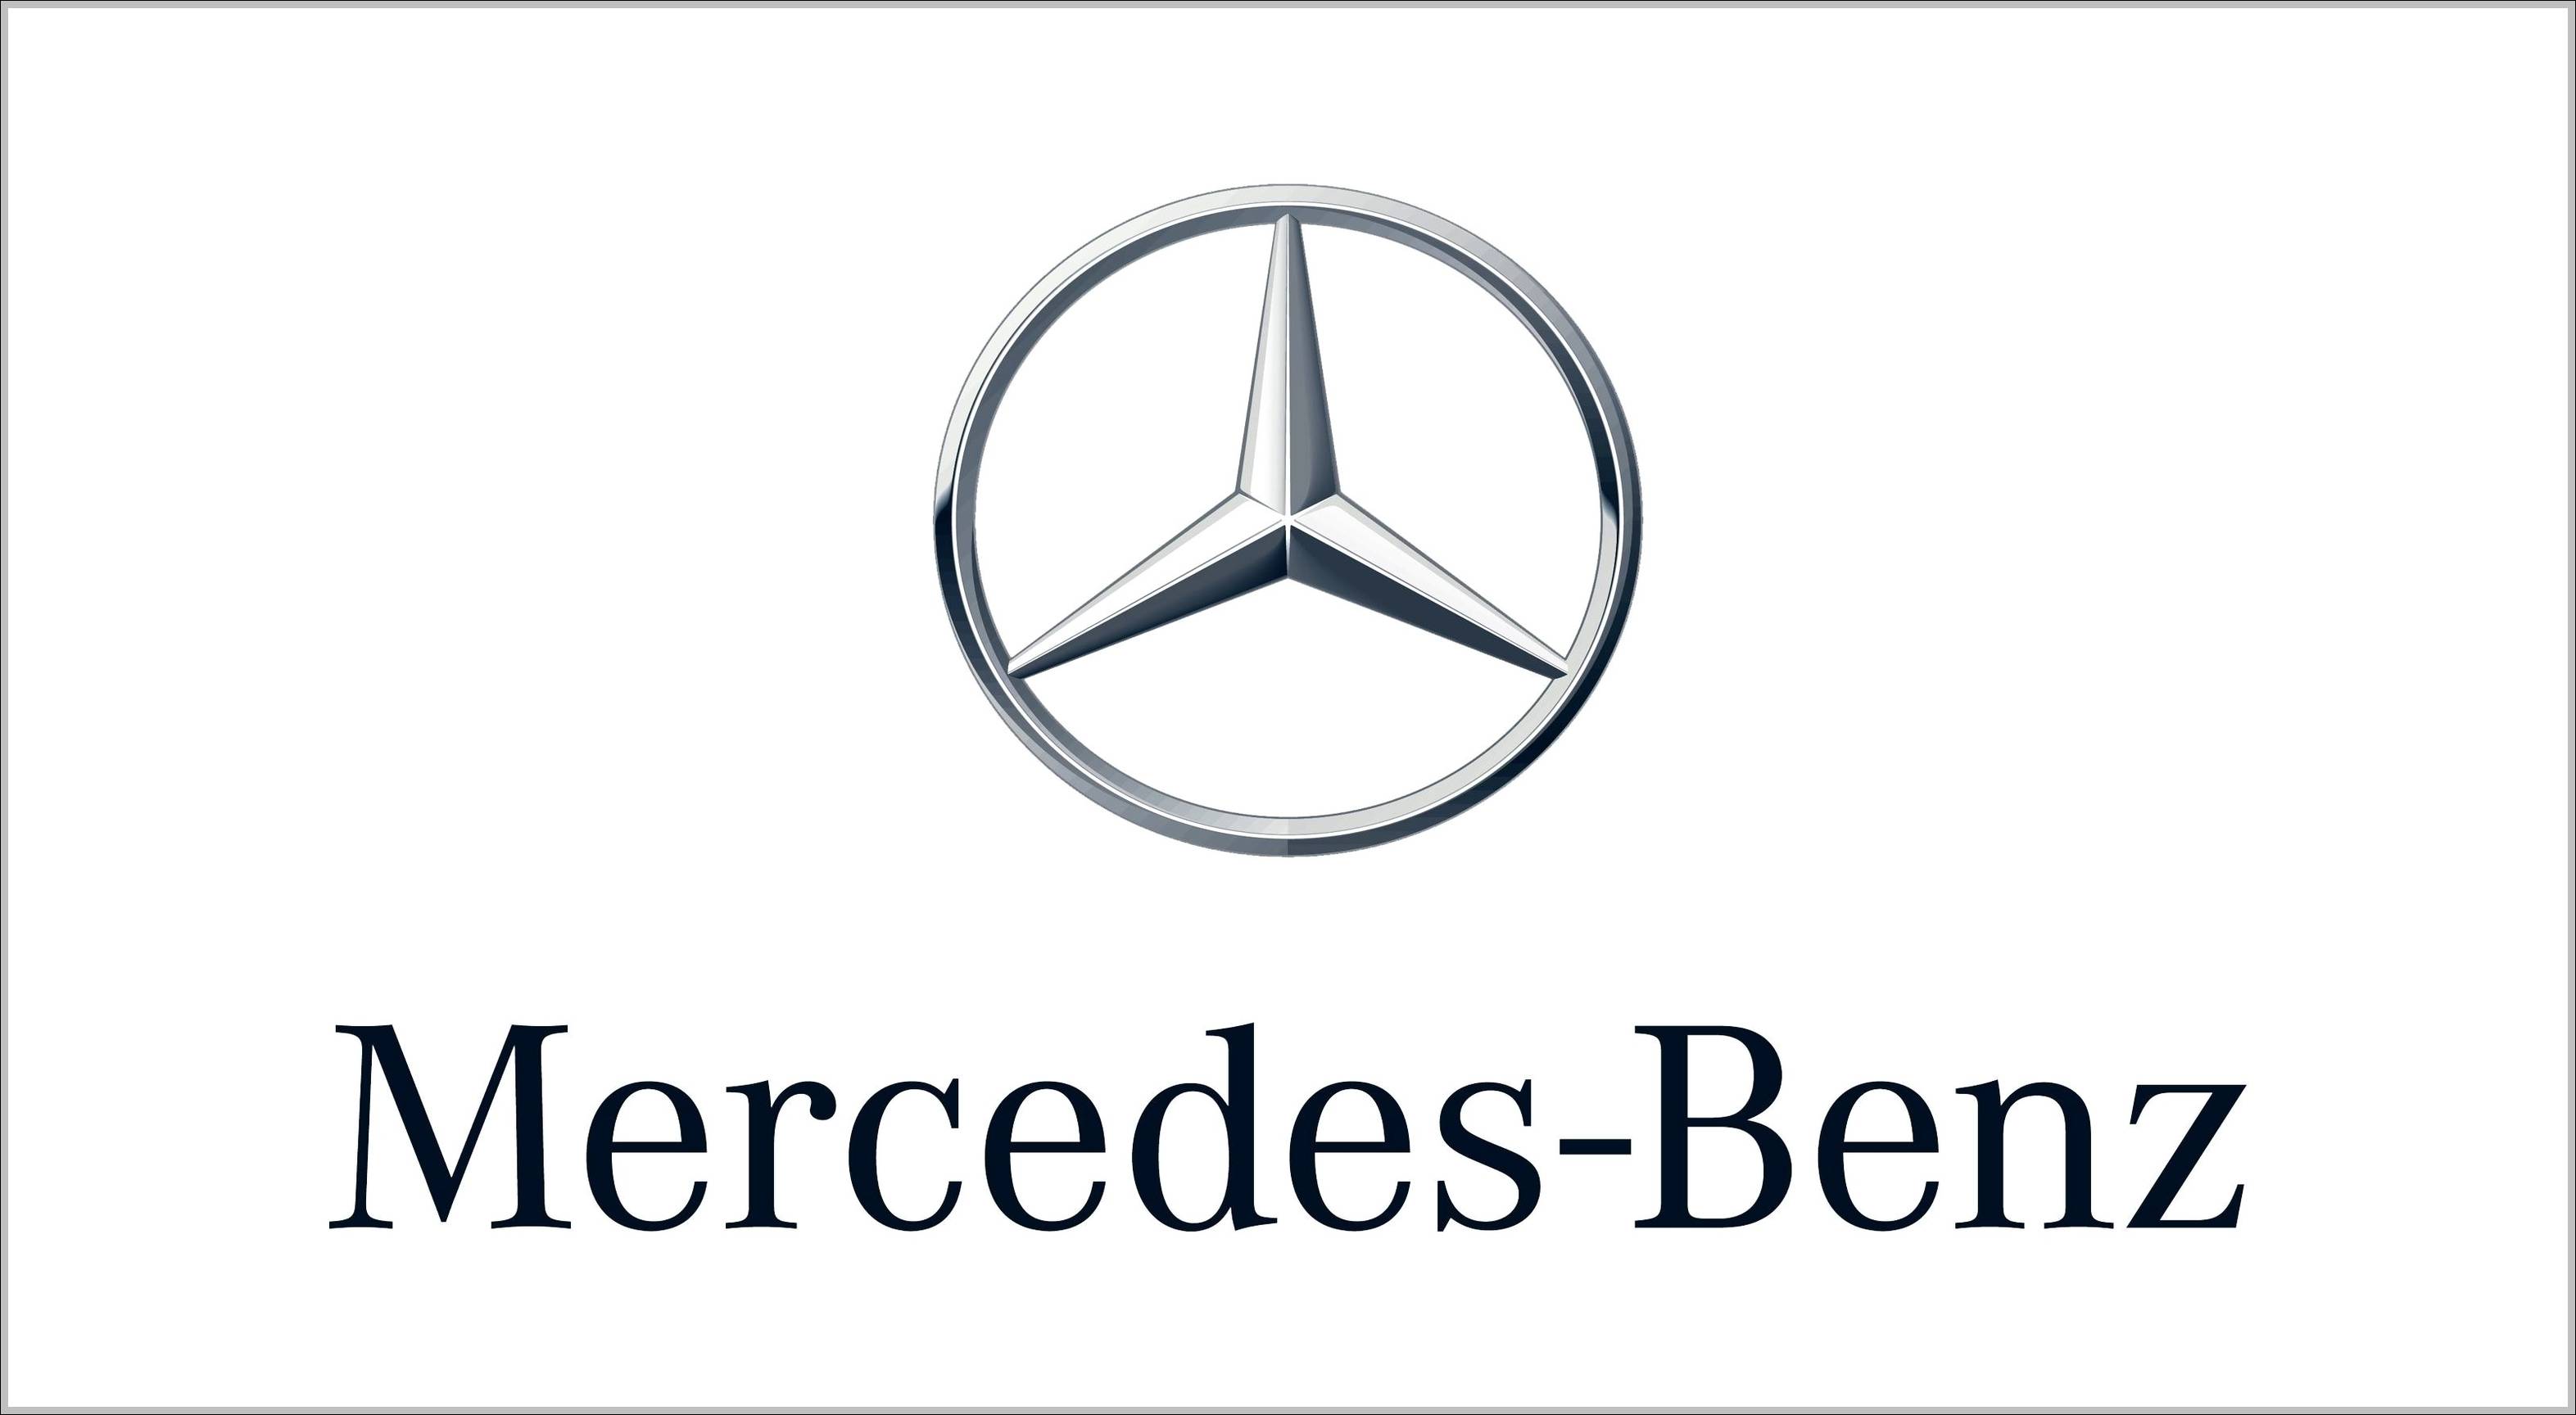 Mercedes Benz Logo 2011 Logo Sign Logos Signs Symbols Trademarks Of Companies And Brands